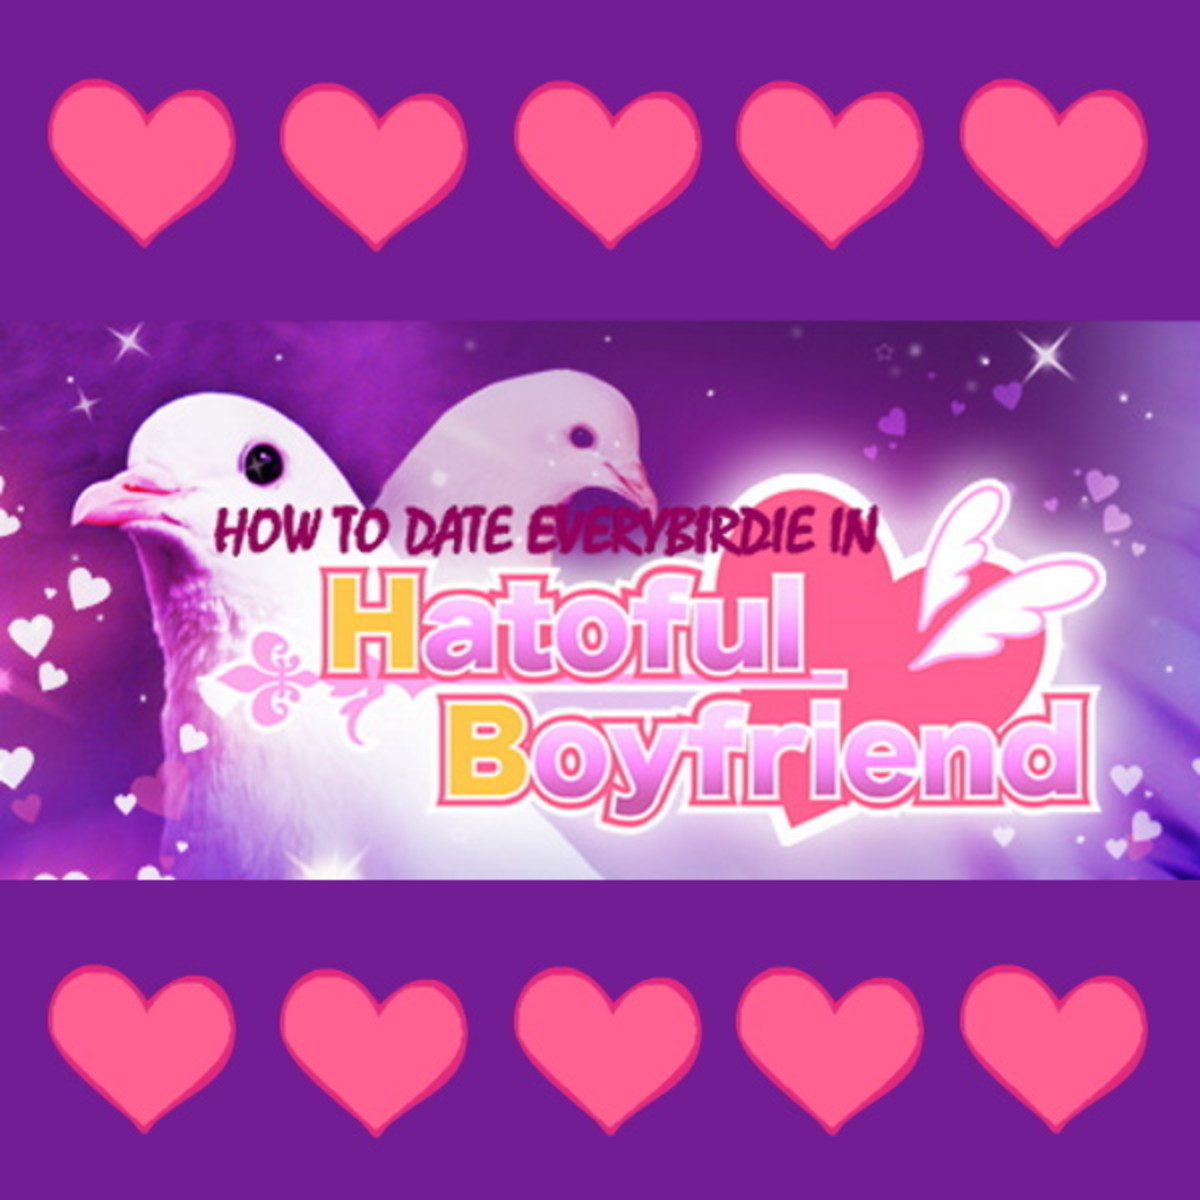 Hatoful Boyfriend may have started as an April Fools joke, but it's got a lot of heart and surprising depth, as well as some surprising secrets...